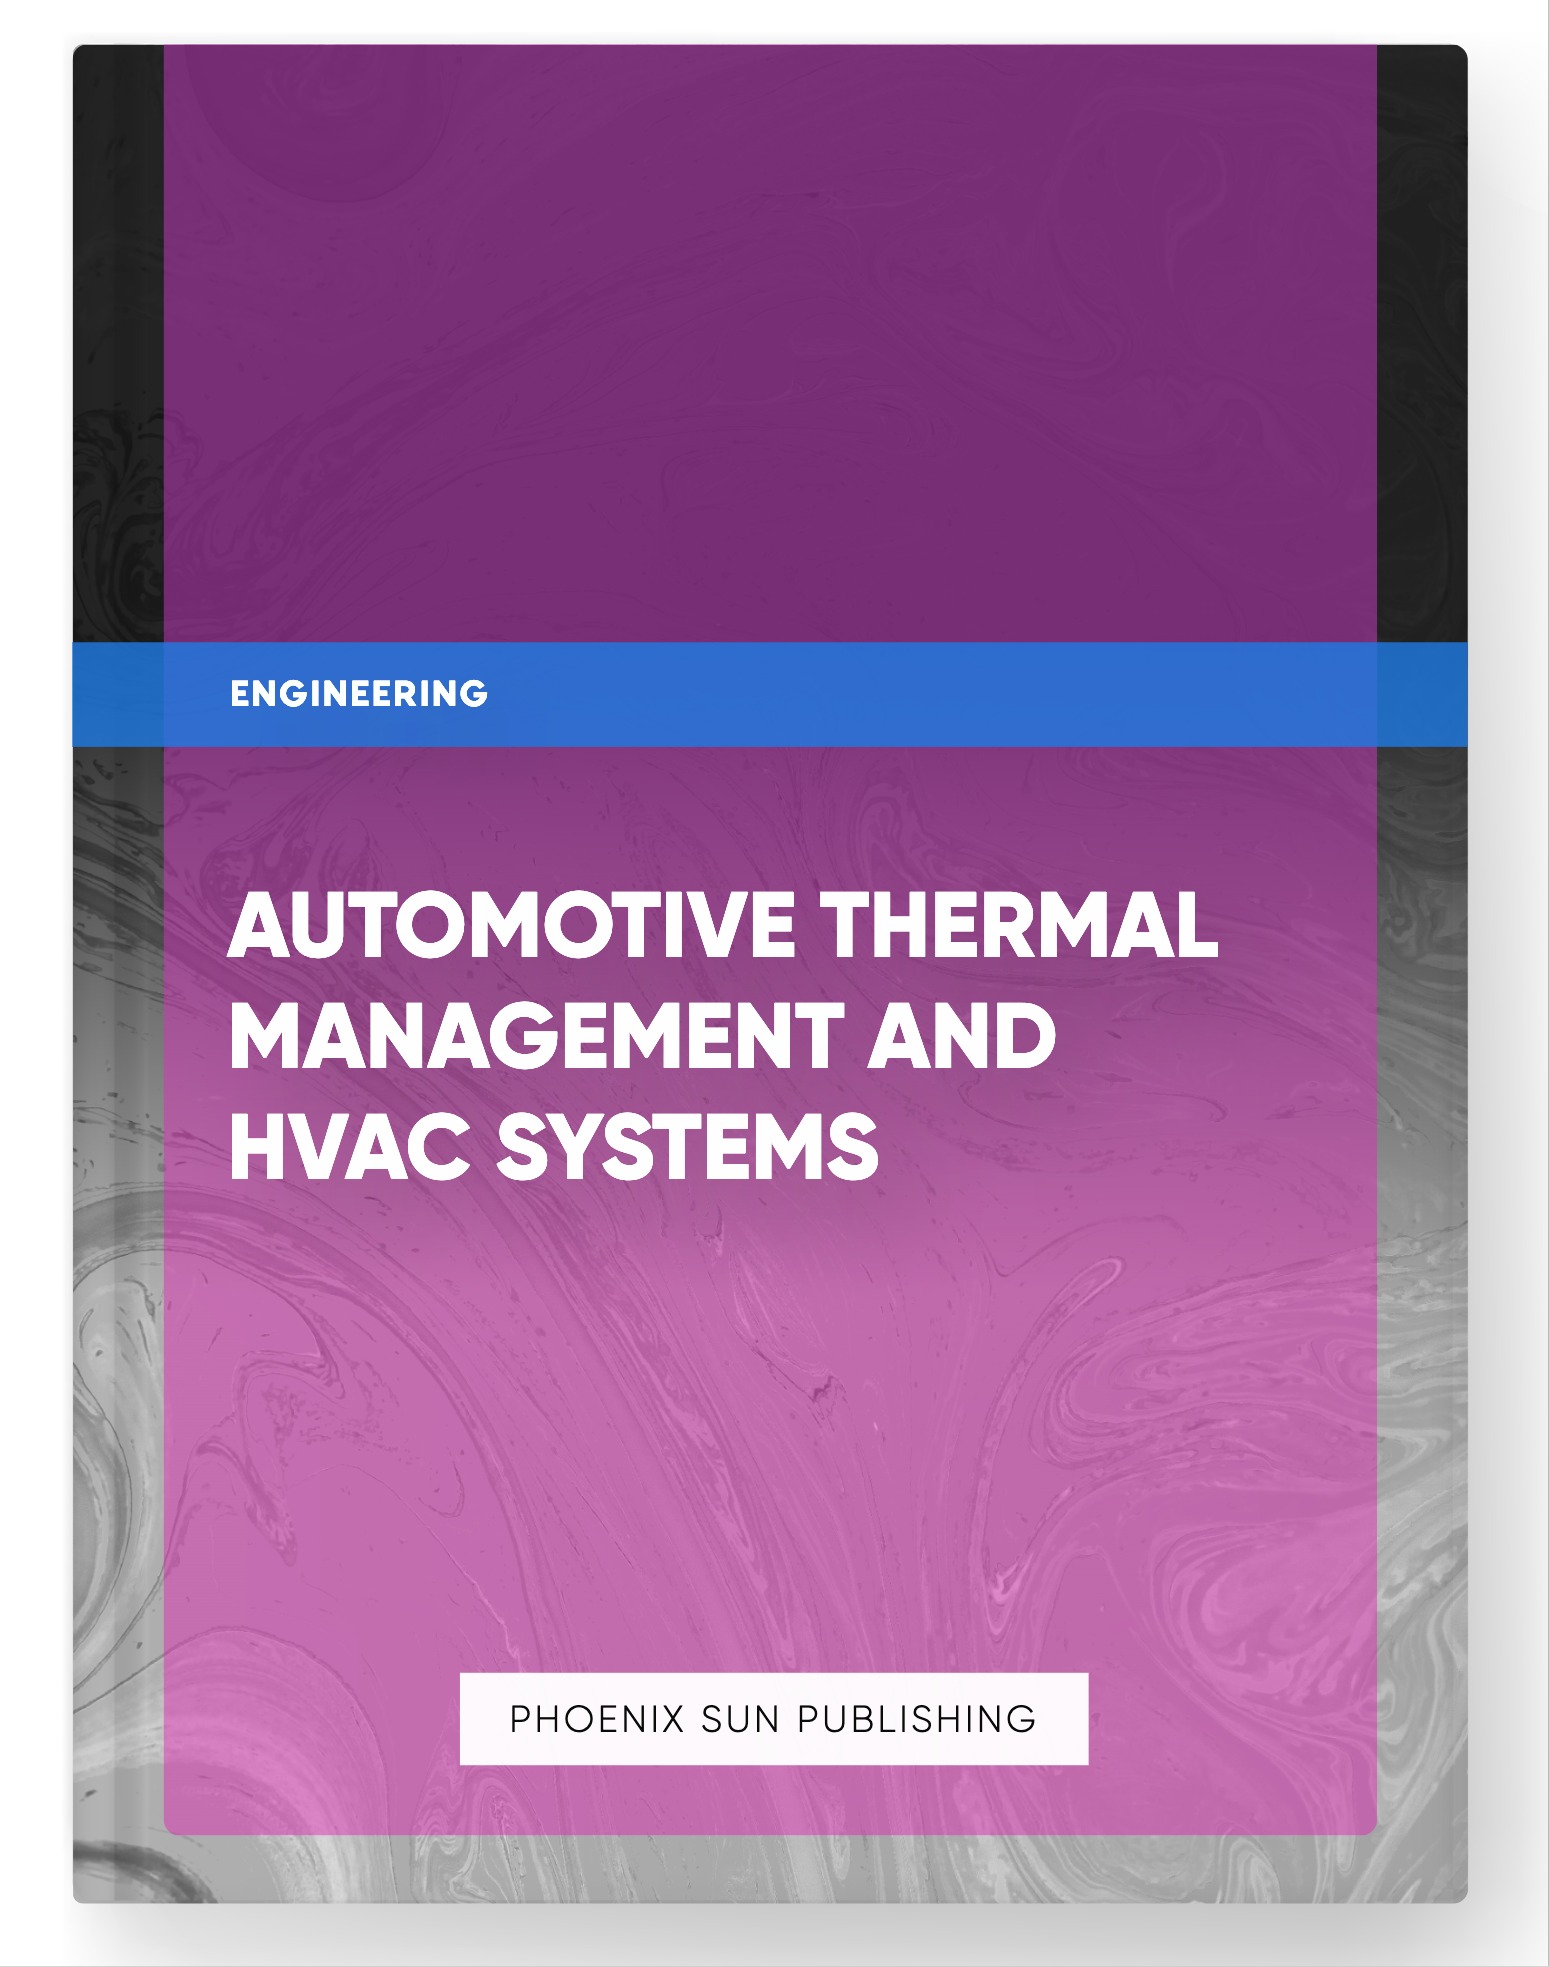 Automotive Thermal Management and HVAC Systems